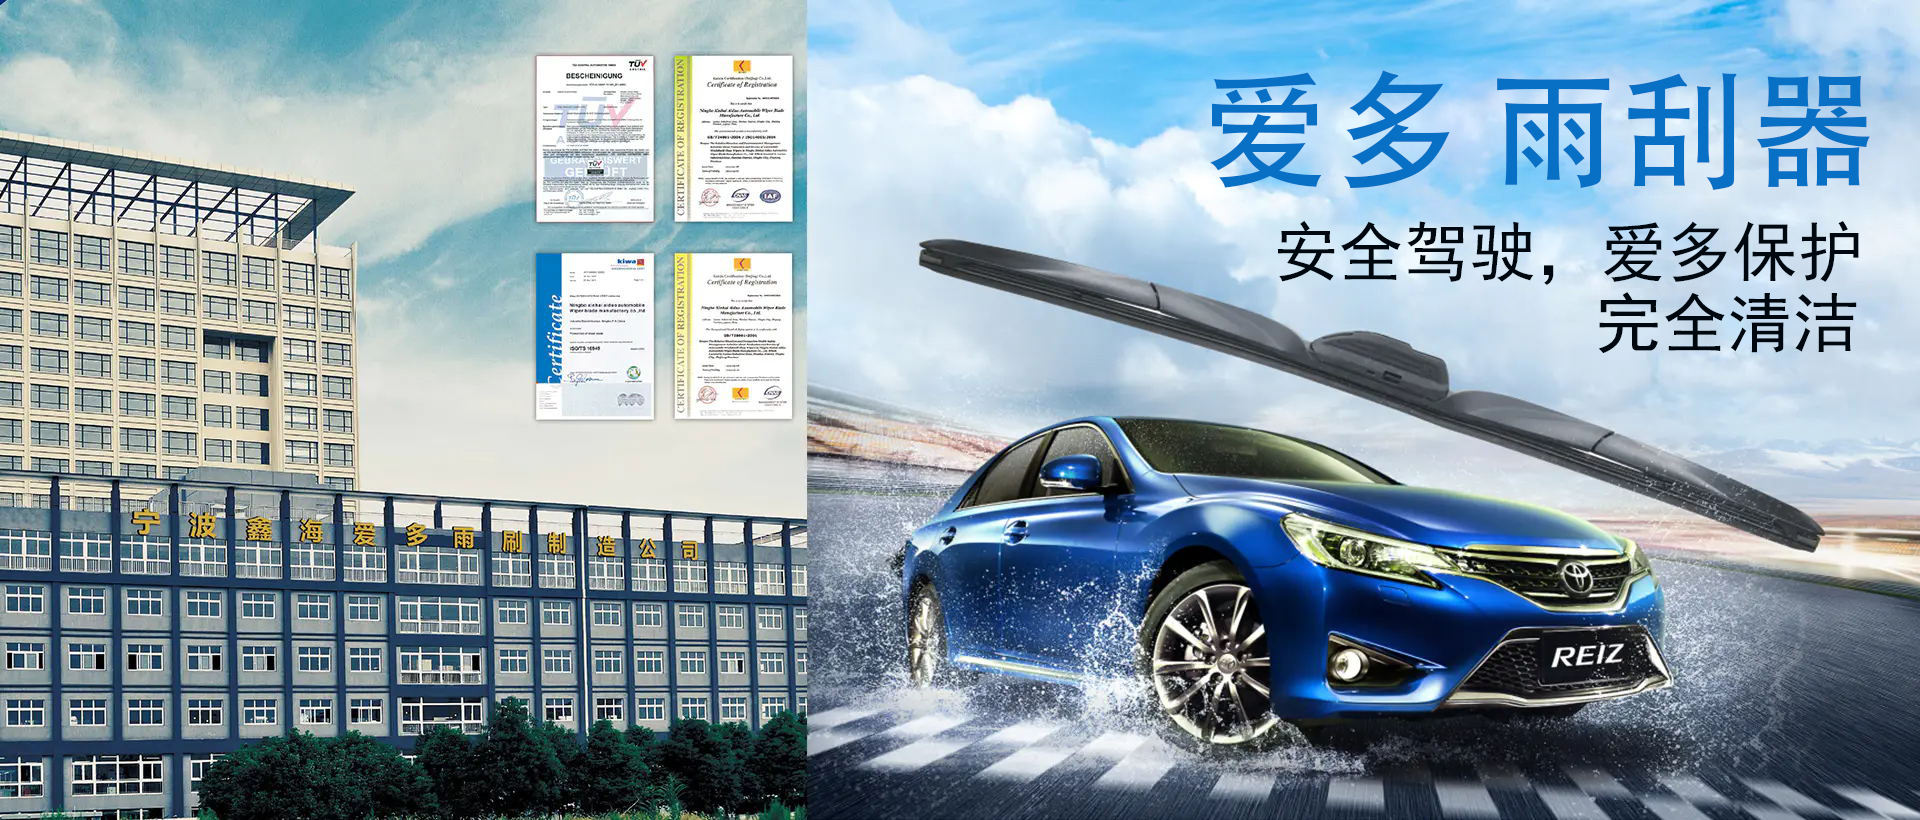 Natural rubber frameless wipers: the guardian of silent driving